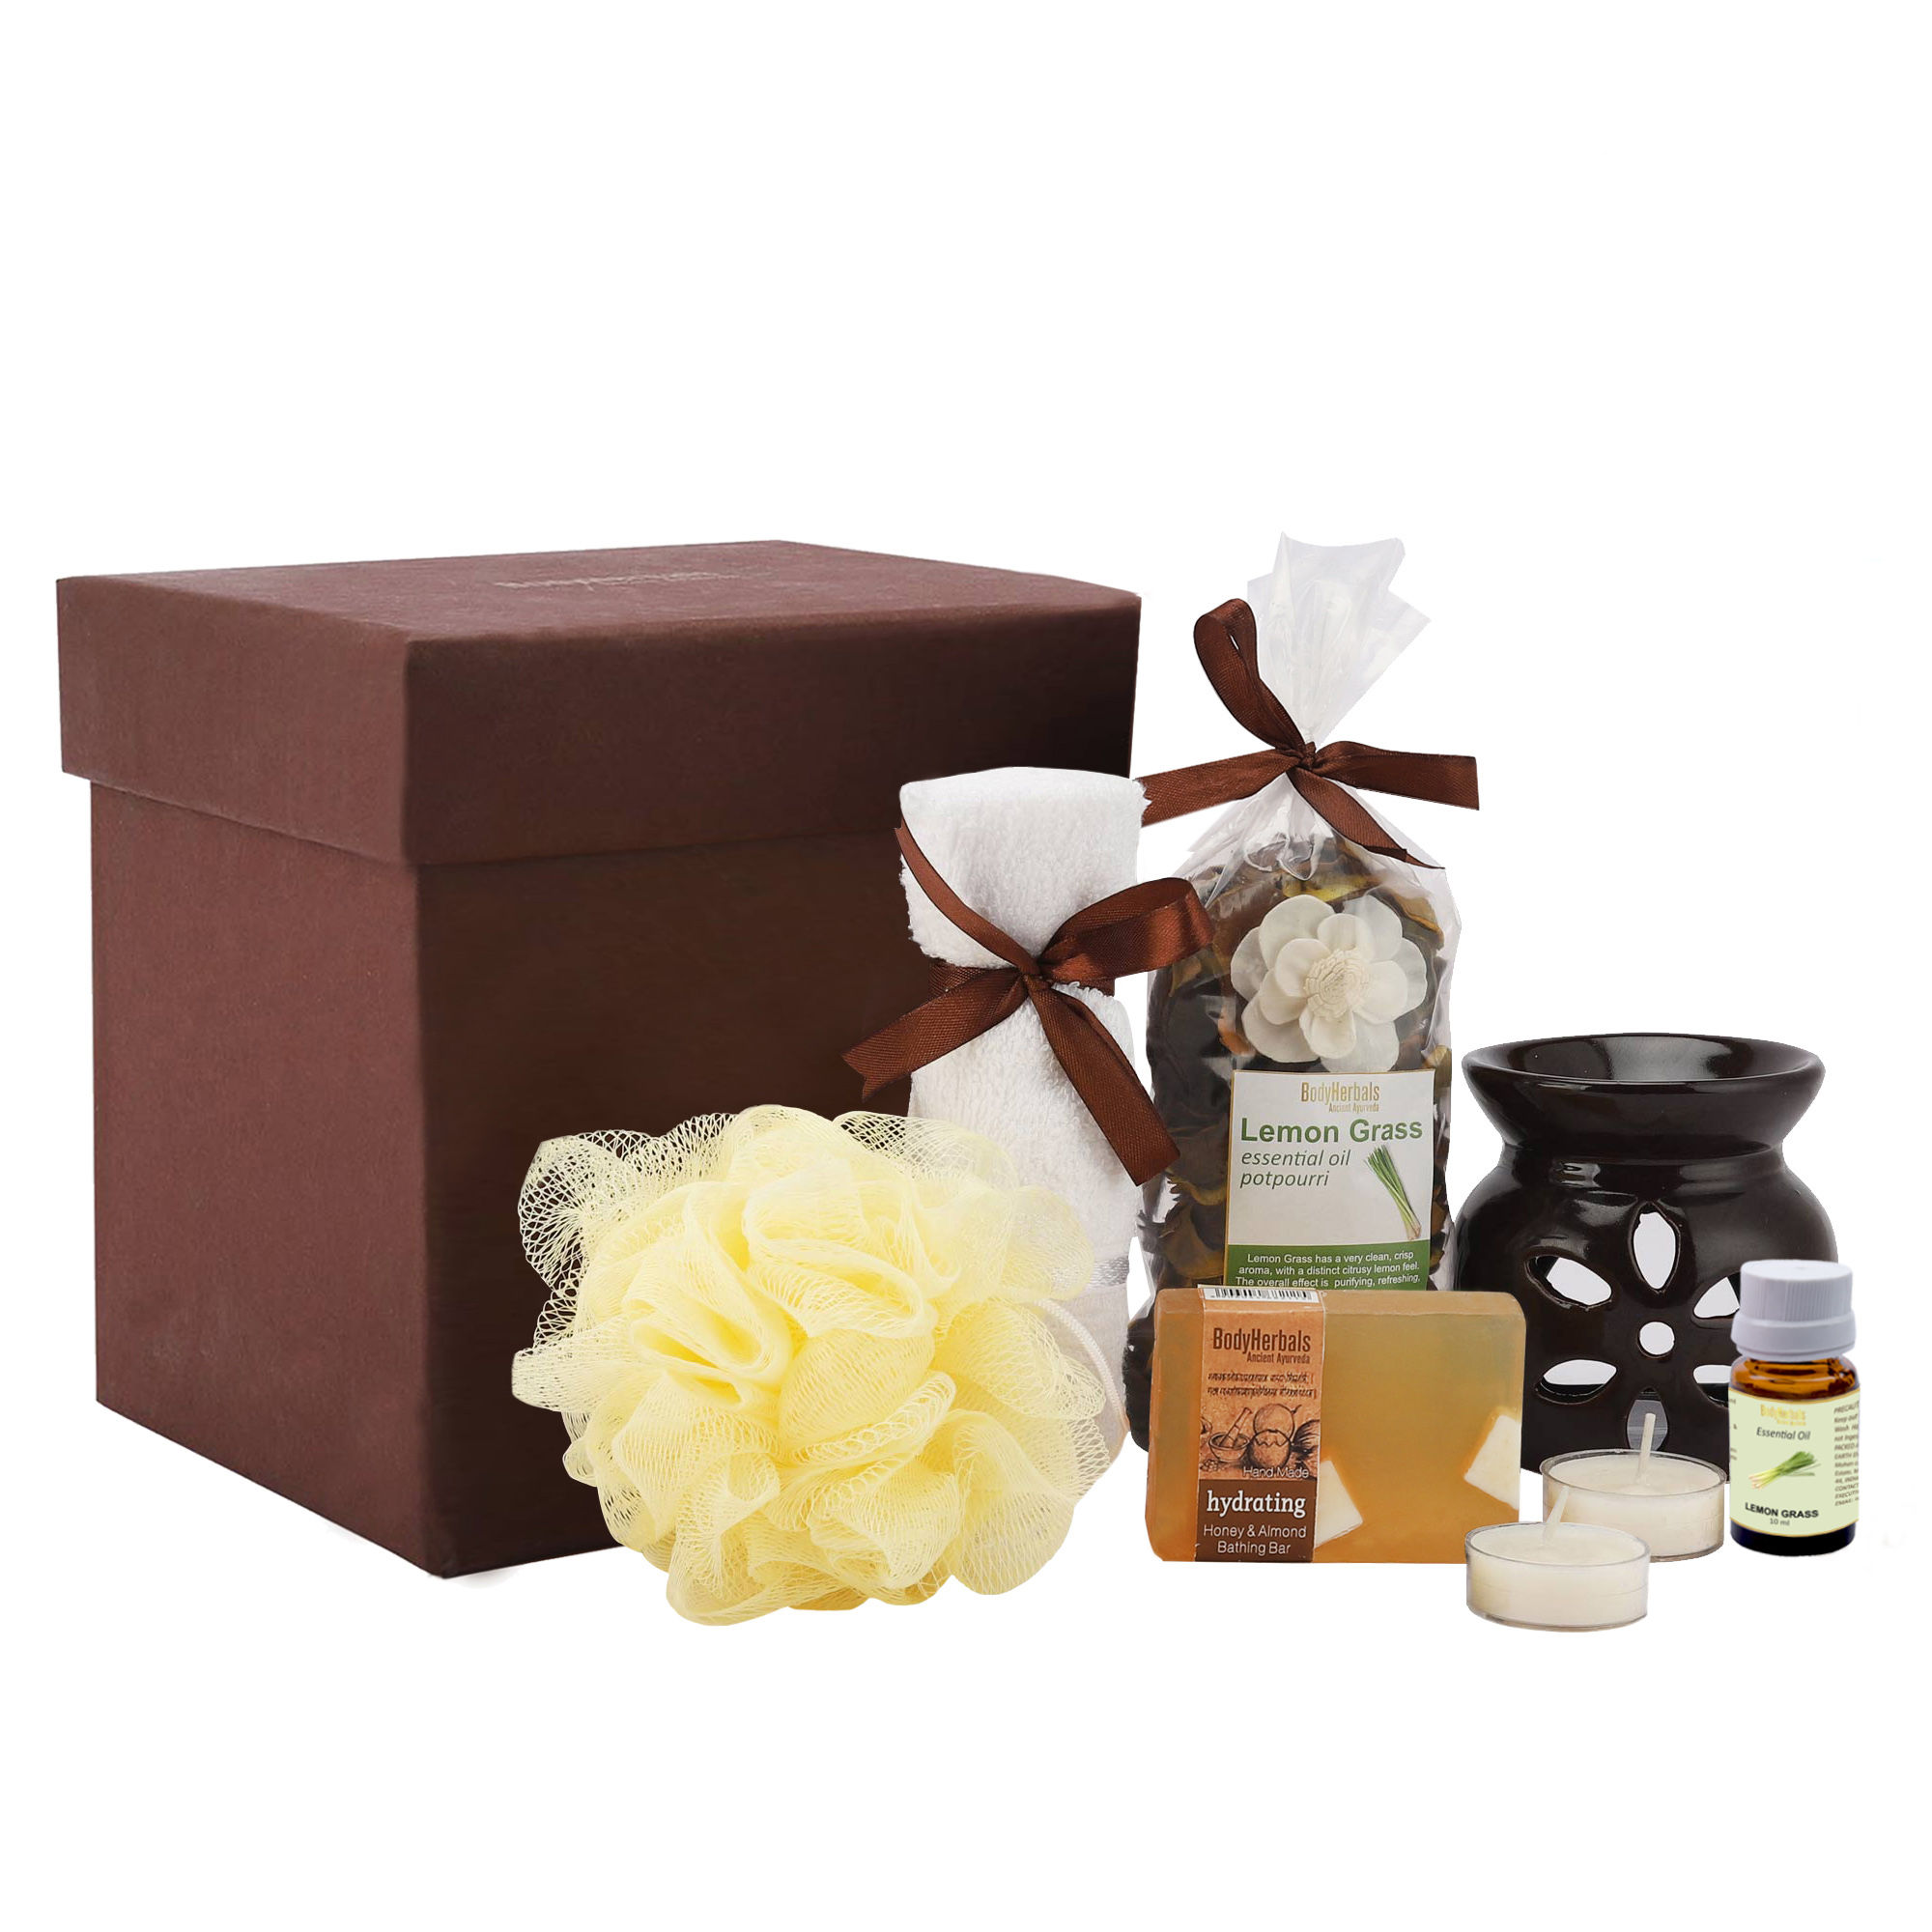 BodyHerbals Honey & Almond Soap Spa Set Gift Box - Gift Sets & Combos for Women & Men